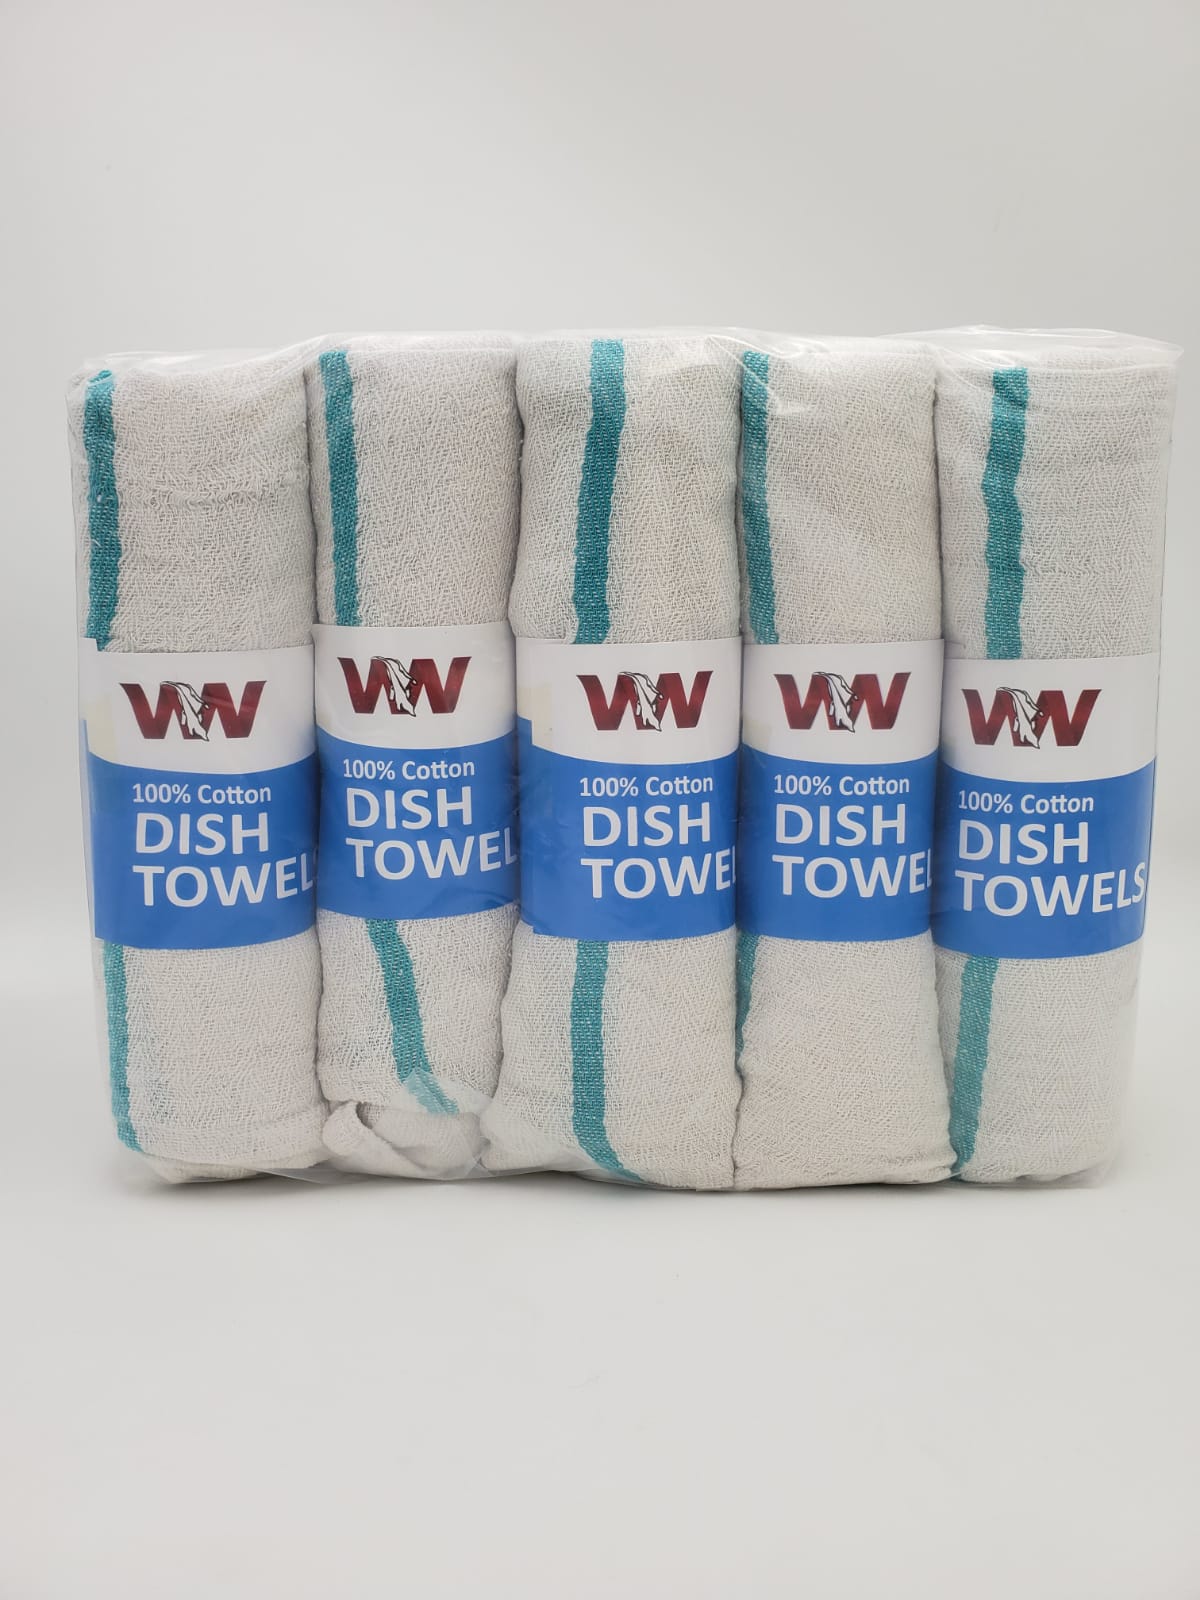 Kitchen Towels (1000+ products) compare prices today »